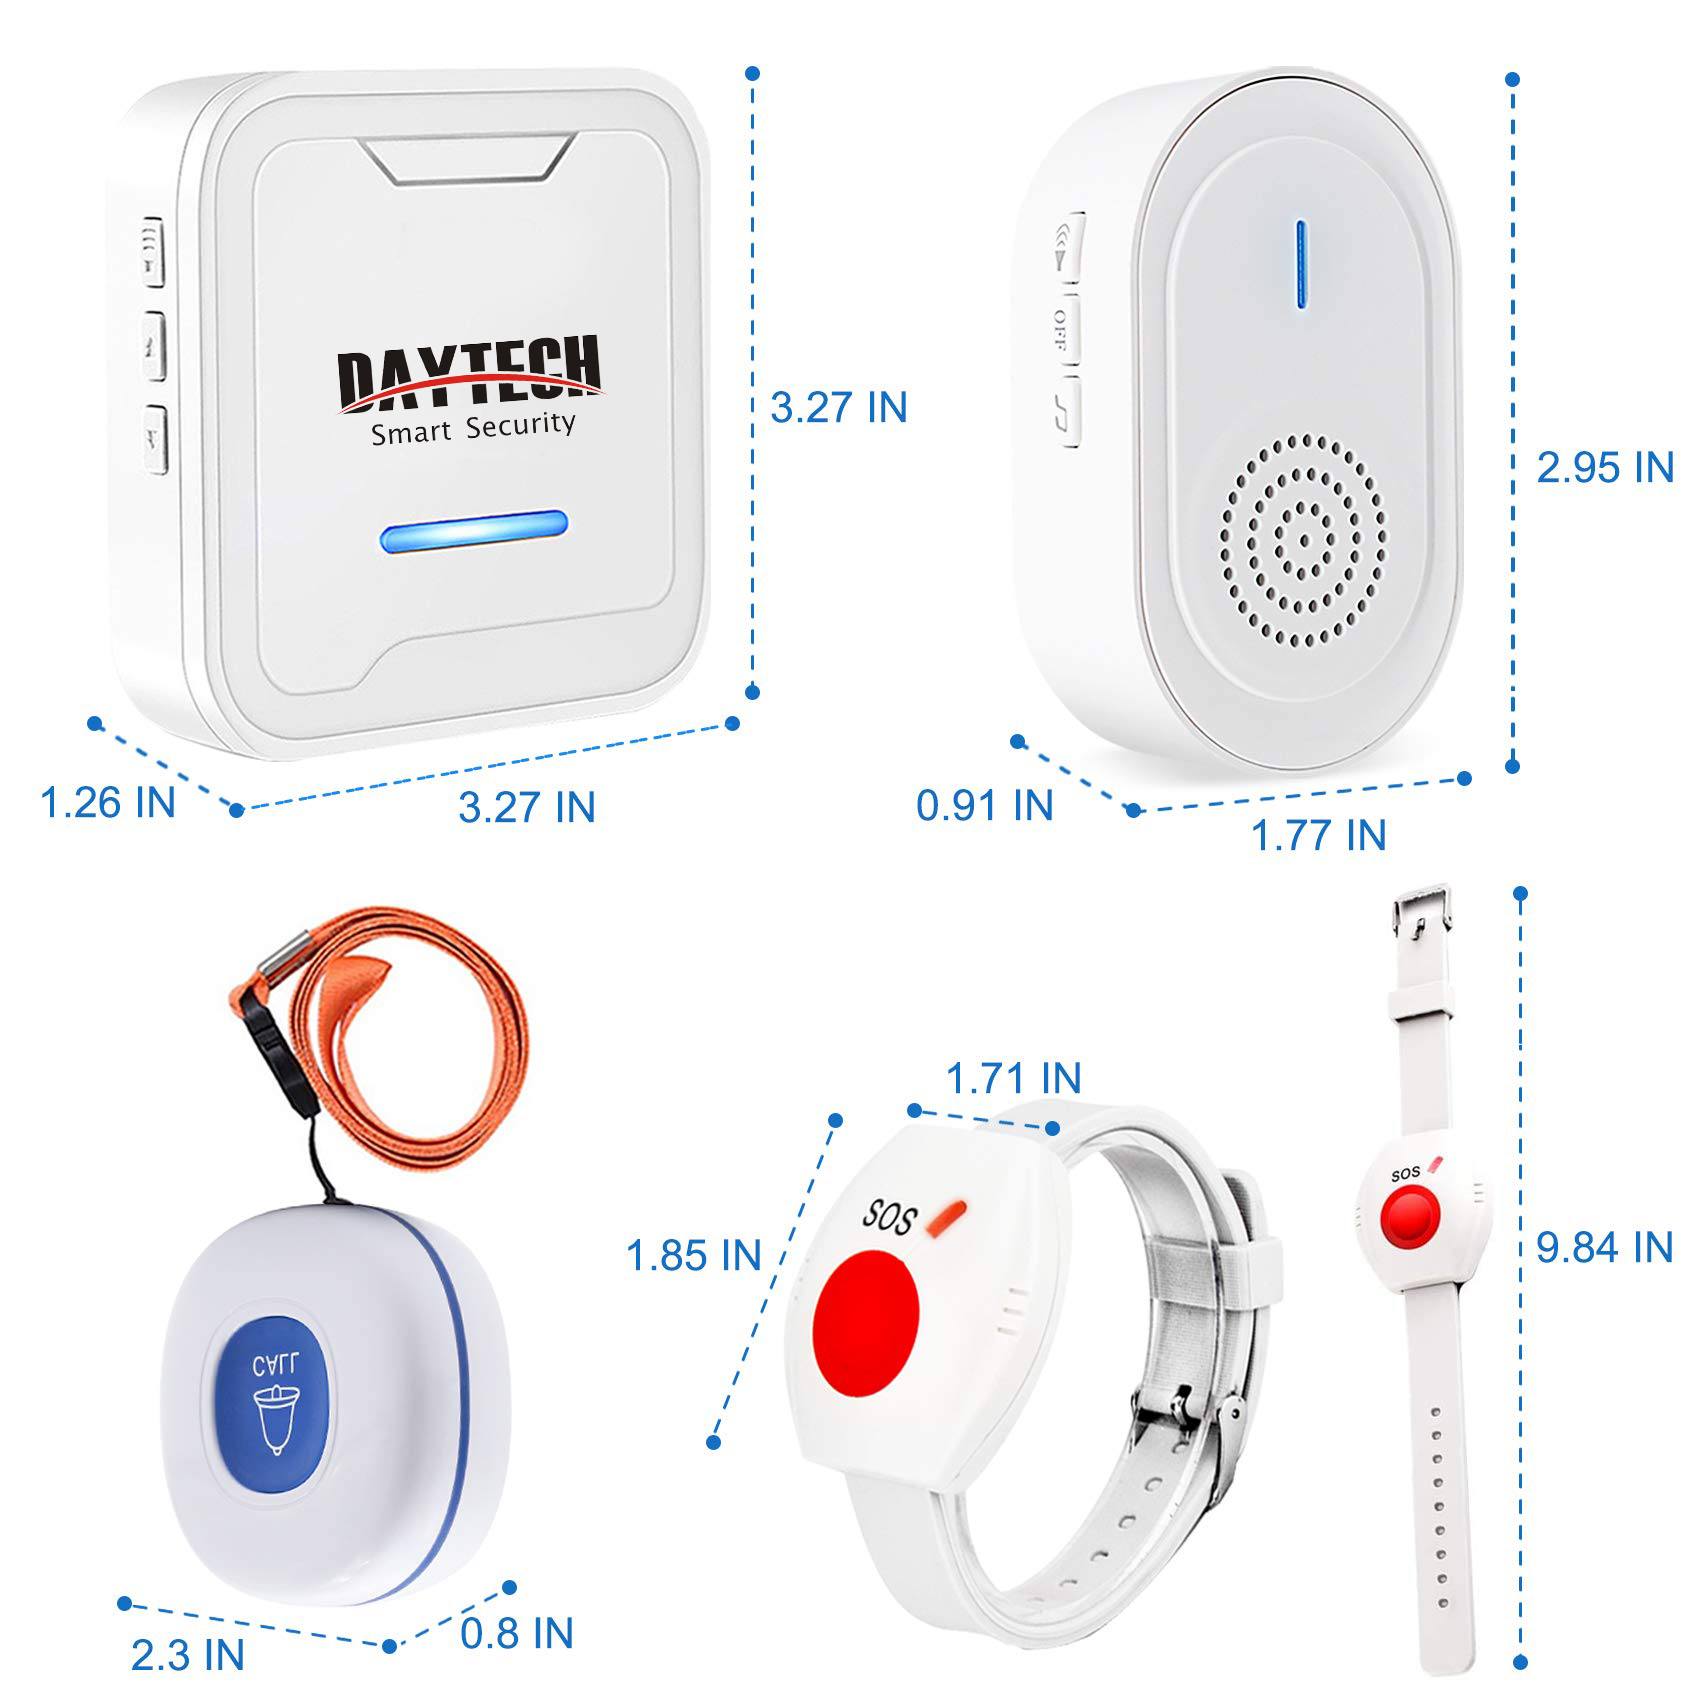 Daytech Wireless Caregiver Pager Call Button Medical Nurse Alert System Alarm and Panic Button for Home/Patients/Disabled wholesale rechargeable wireless caregiver pager call wireless pager manufactur